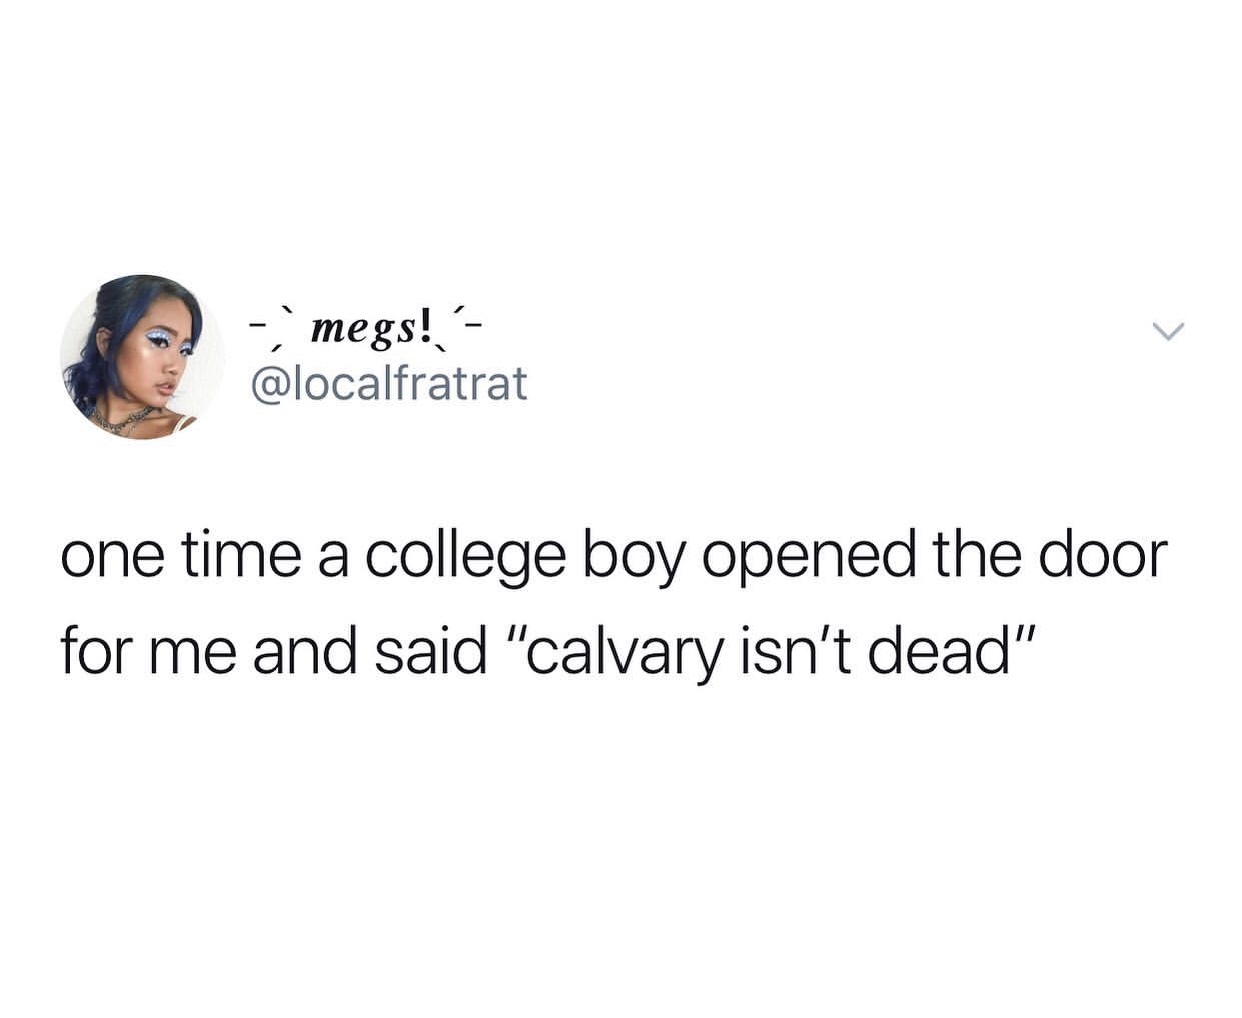 smile - megs! one time a college boy opened the door for me and said "calvary isn't dead"